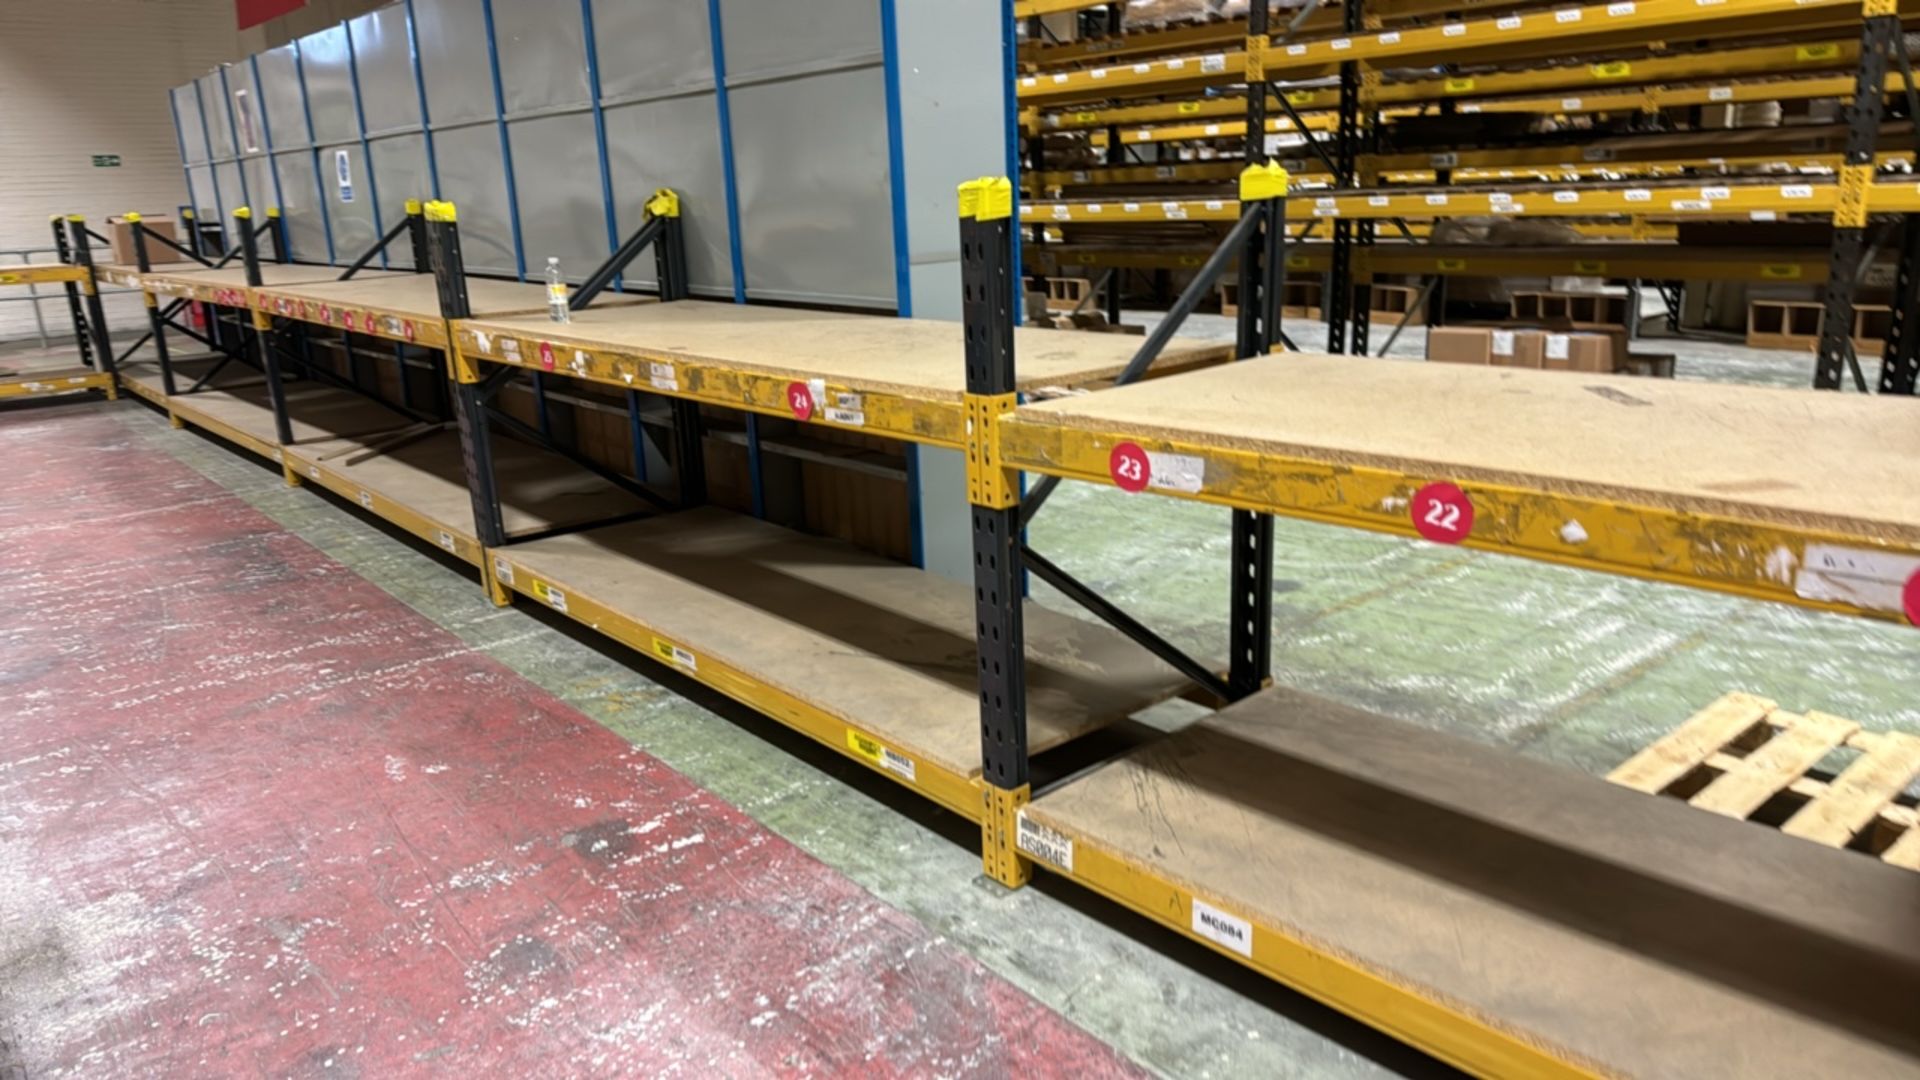 7 Bays of Boltless Industrial Pallet Racking - Image 3 of 4